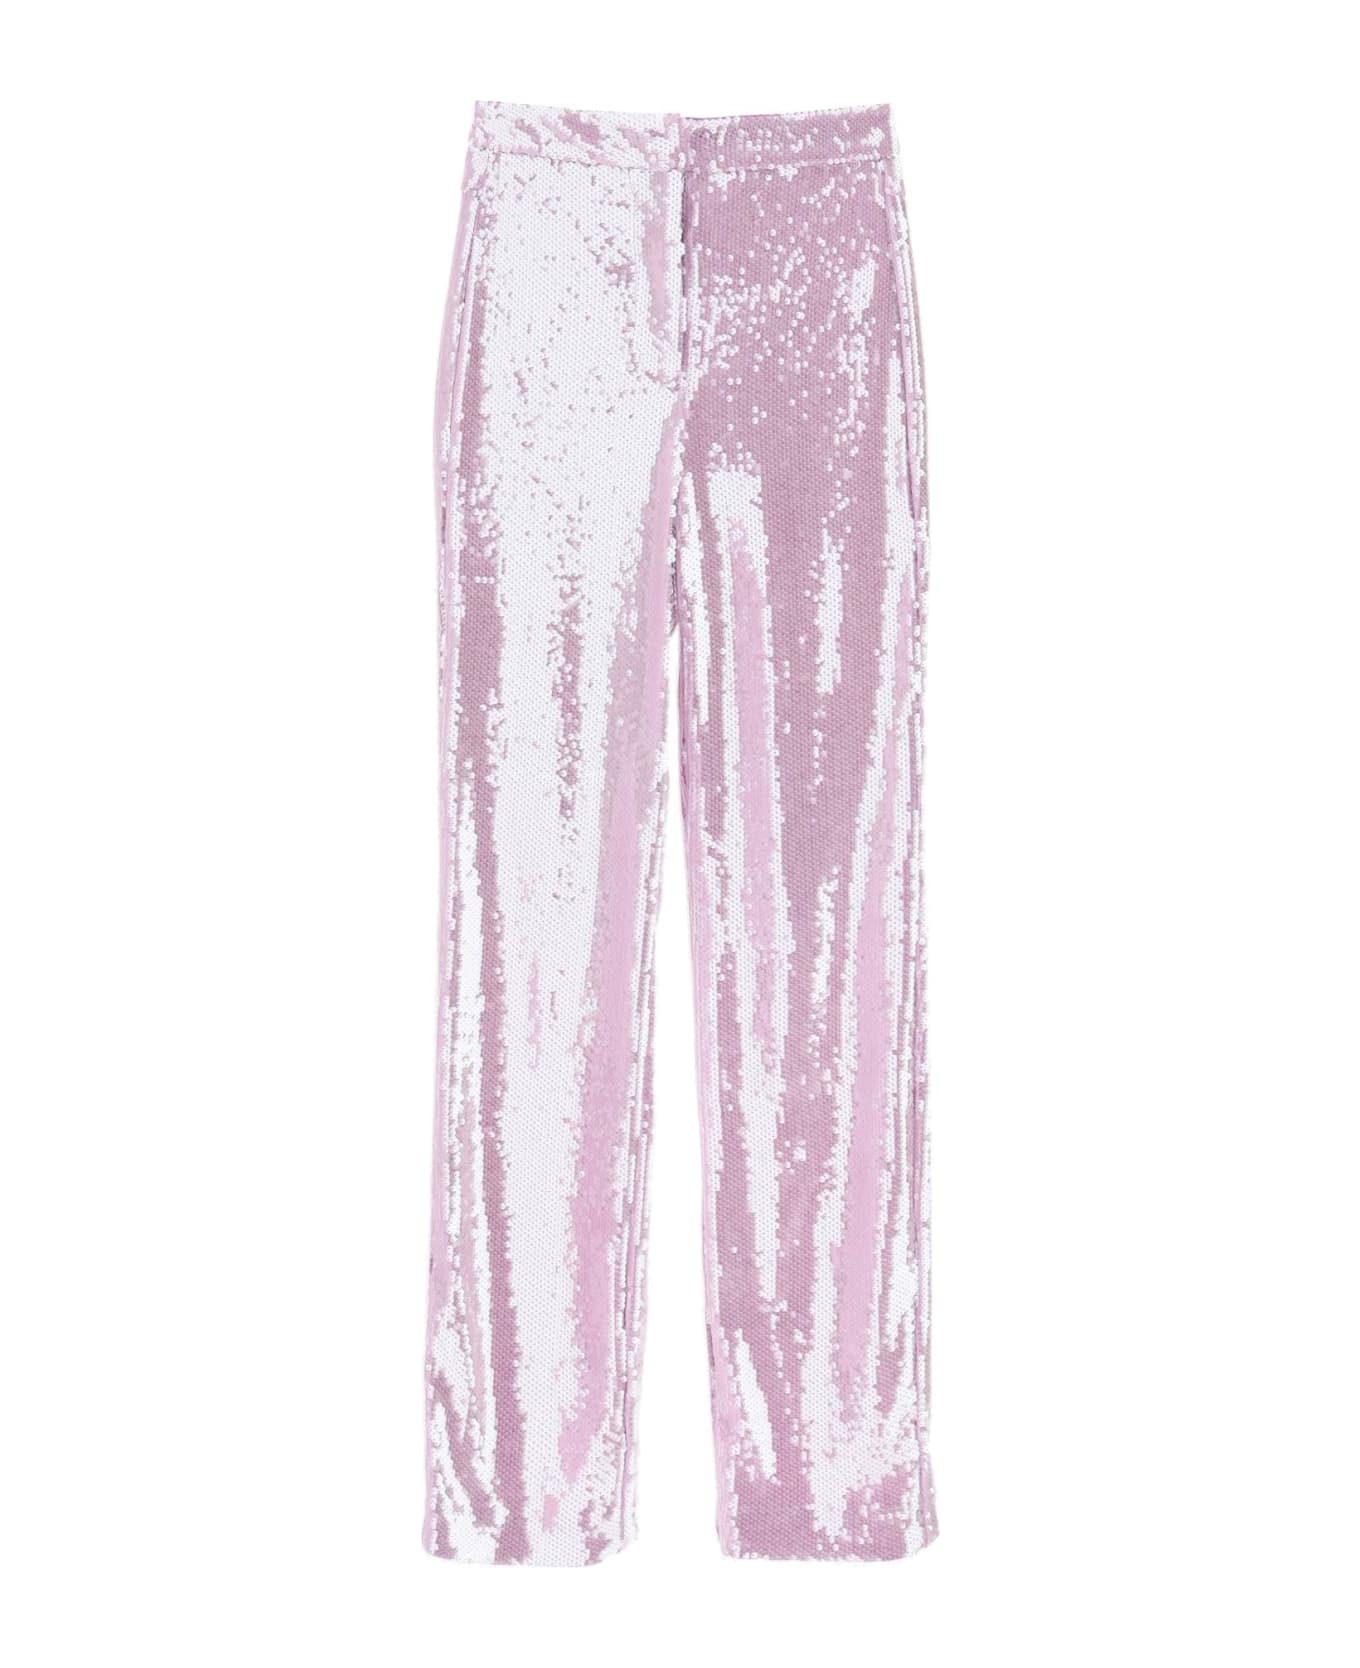 Rotate by Birger Christensen 'robyana' Sequined Pants - LUPINE (Purple) ボトムス